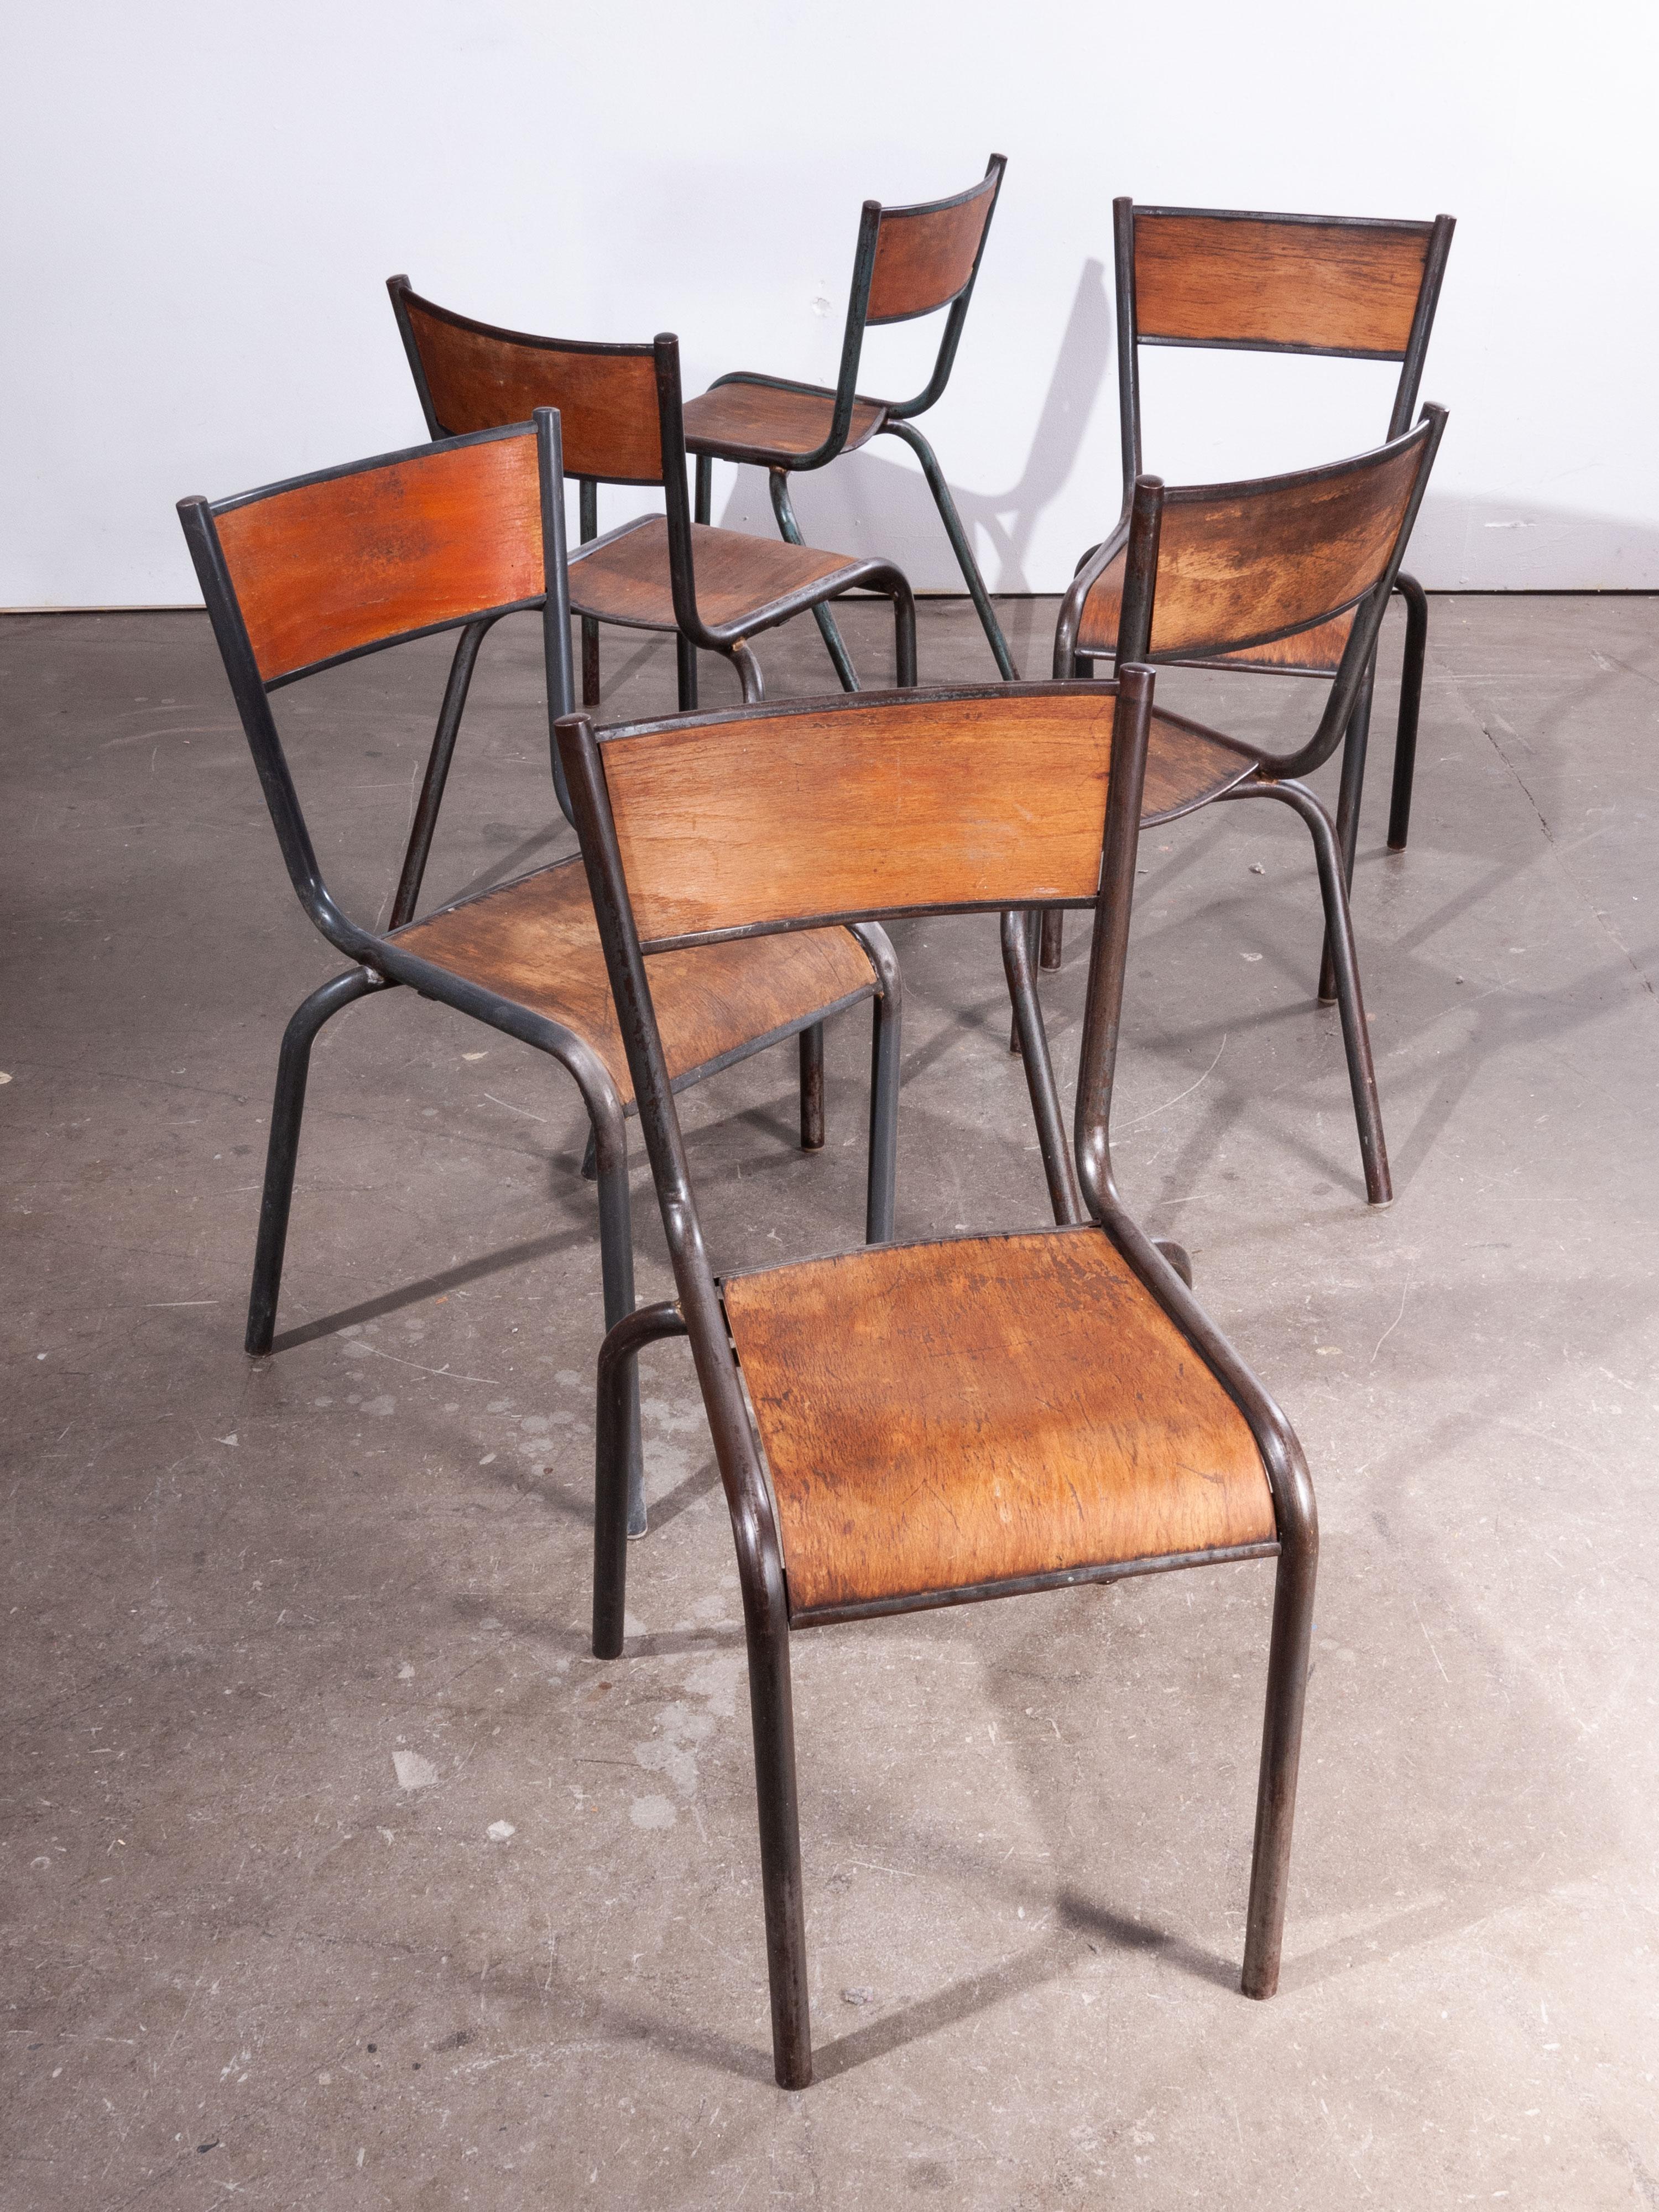 1950s French Mullca dining chairs – set of six – other quantities available

Set of six 1950s French Mullca vintage stacking school/dining chairs. One of our most favorite chairs, in 1947 Robert Muller and Gaston Cavaillon created the company that